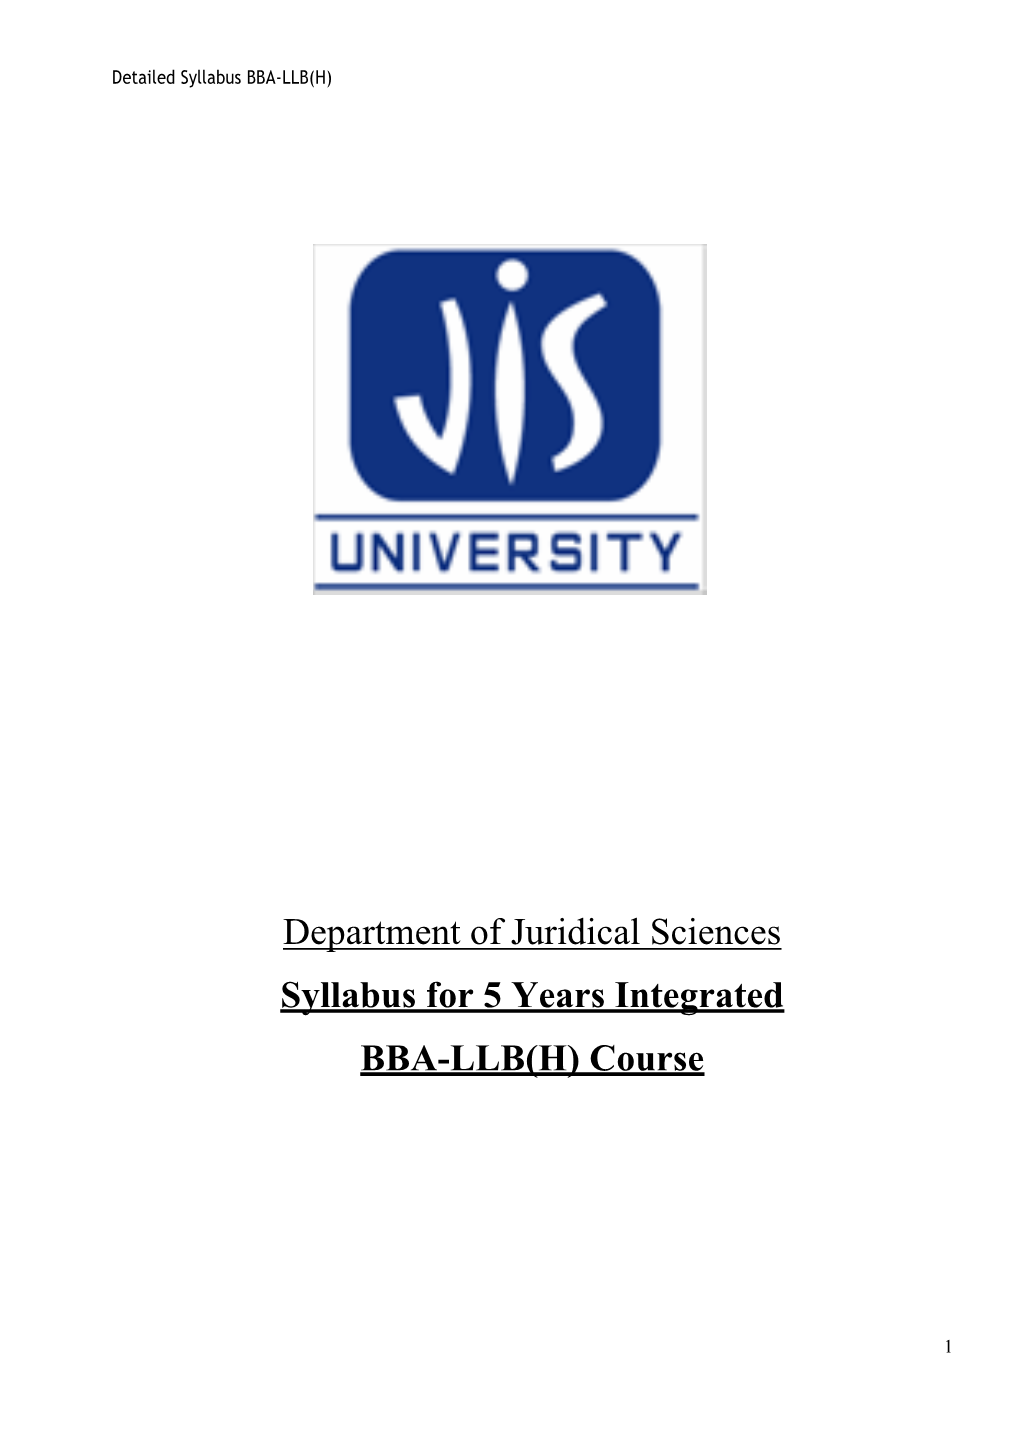 Department of Juridical Sciences Syllabus for 5 Years Integrated BBA-LLB(H) Course